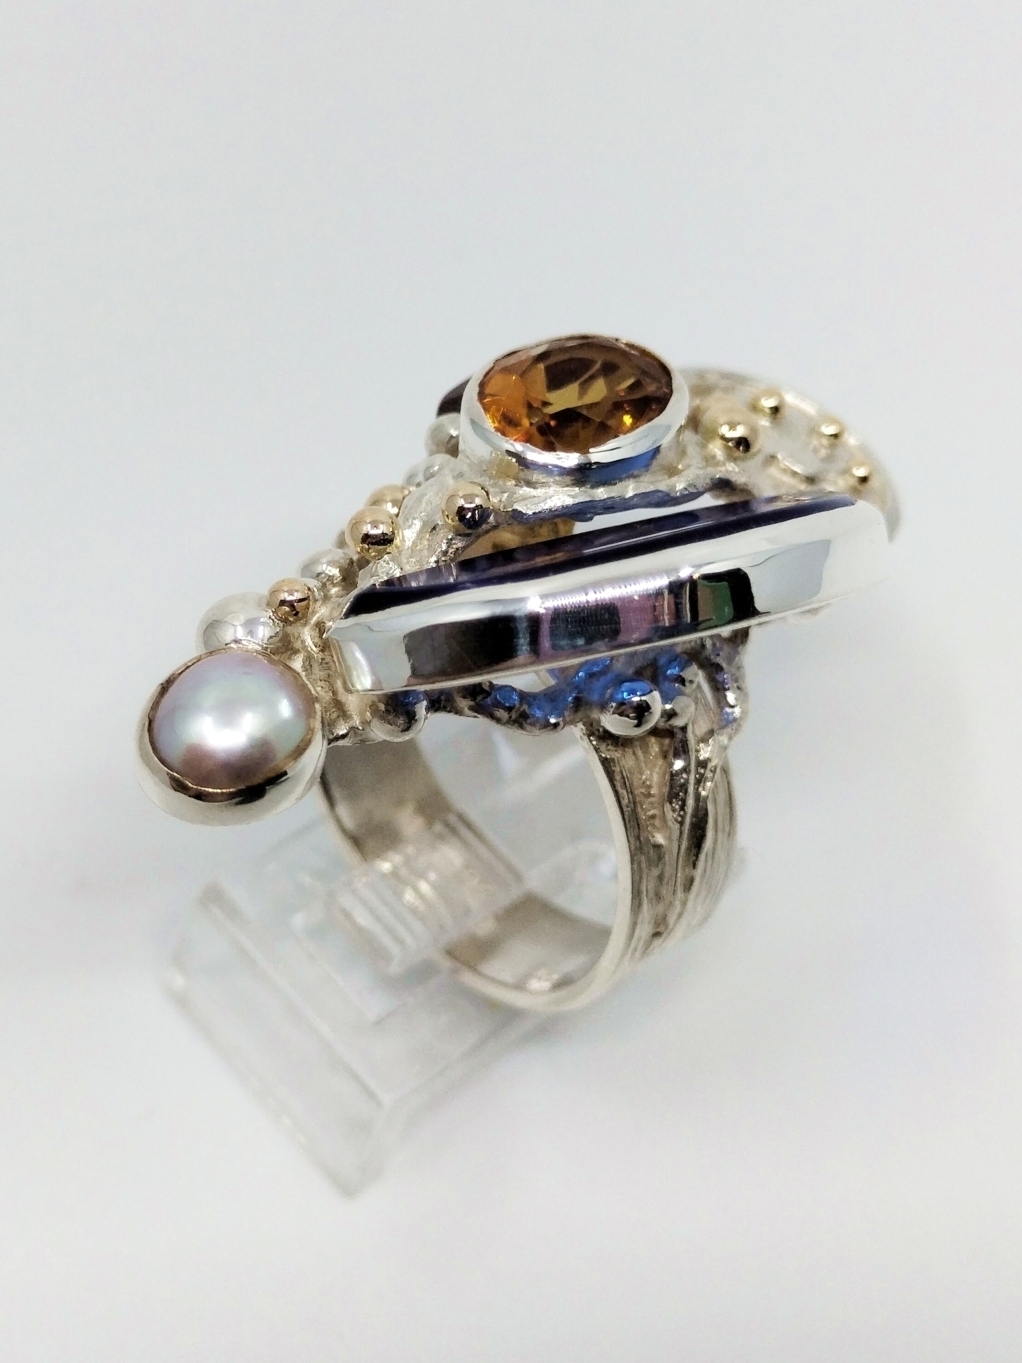 original maker's handcrafted jewellery, gregory pyra piro ring 3624, mixed metal jewelry, 14k gold and silver, sterling silver and 14 karat gold, artist with own style, unique style jewelry, silver and gemstone jewelry, gemstone and pearl jewelry, gold and color gemstone jewelry, citrine, garnet, pearl, glass, art nouveau inspired fashion jewelry, jewellery with natural pearls and semi precious stones, contemporary jewelry from silver and gold, art jewellery with colour stones, contemporary jewelry with pearls and color stones, jewellery made from silver and gold with natural pearls and natural gemstones, shopping for diamonds and designer jewellery, accessories with color stones and pearls, artisan handcrafted jewellery with natural gemstones and natural pearls, jewelry made first hand, art and craft gallery artisan handcrafted jewellery for sale, jewellery with ocean and seashell theme